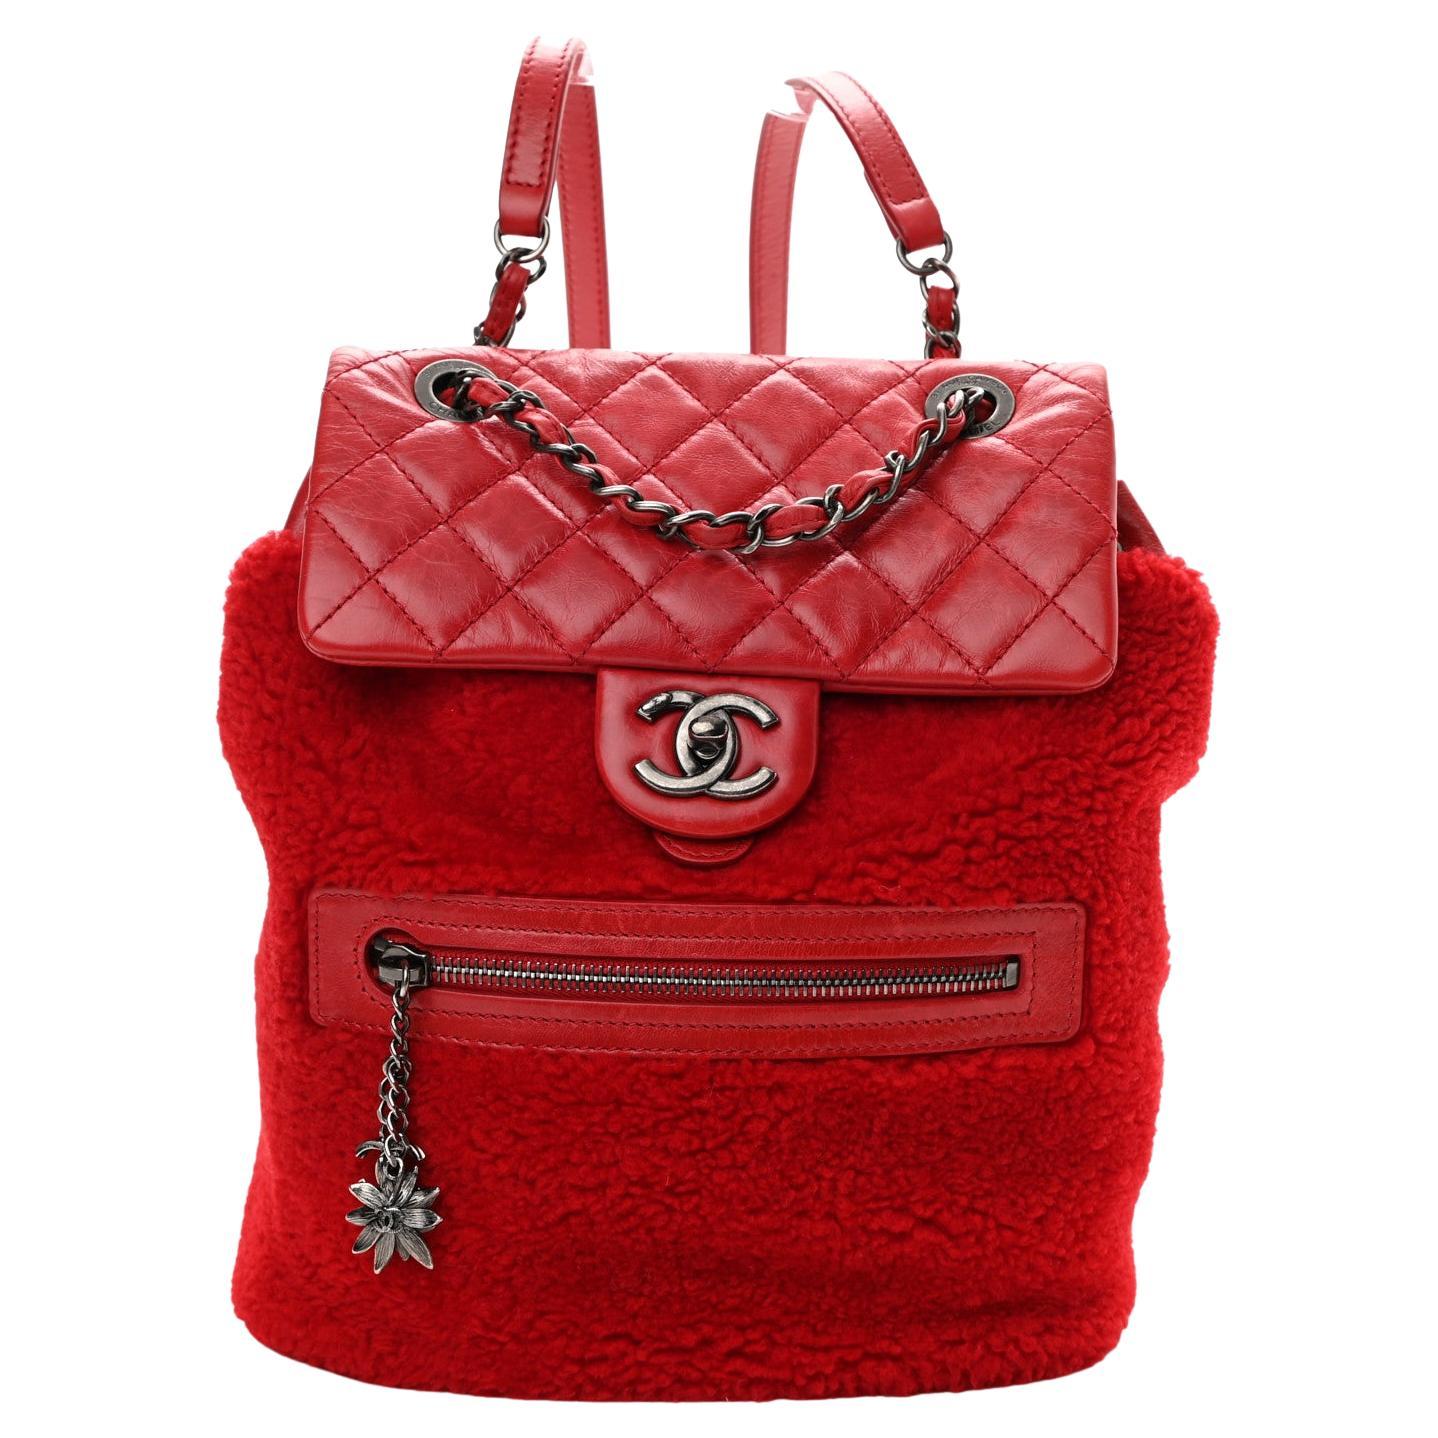 Chanel 2015 Paris-Salzburg Mountain Red Shearling Leather Rucksack Backpack